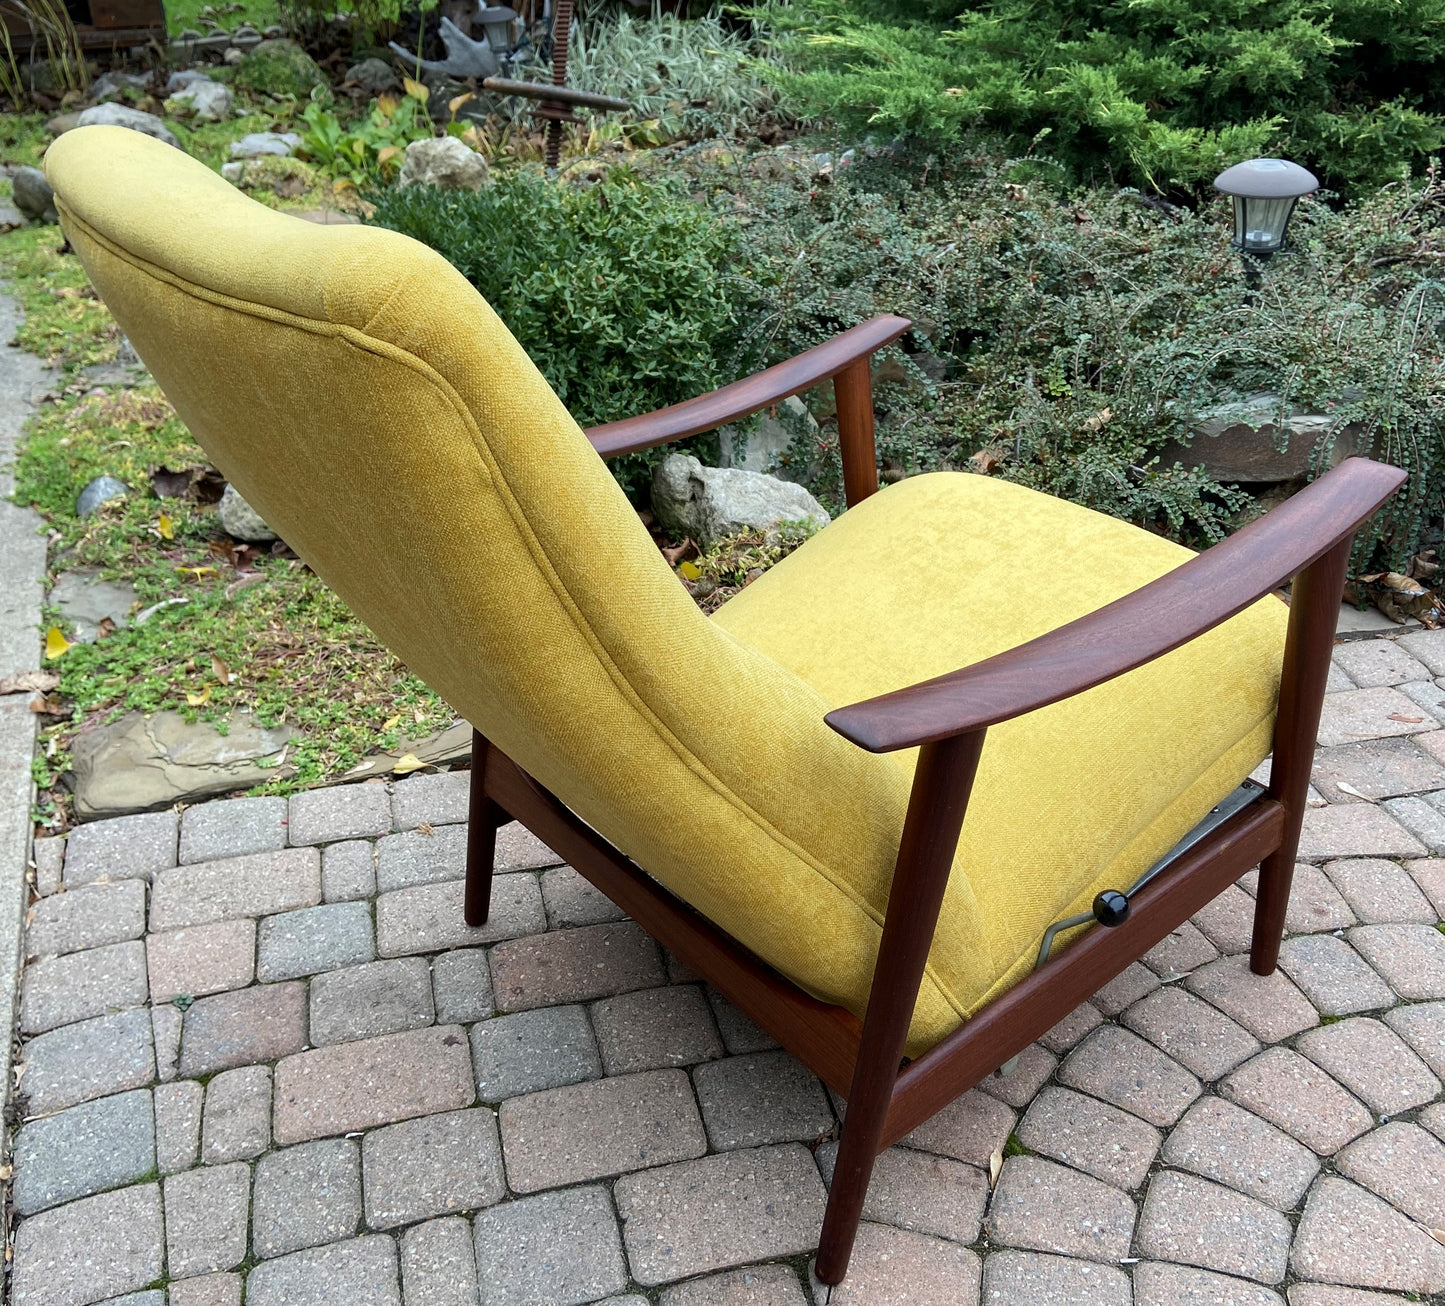 REFINISHED REUPHOLSTERED Mid-Century Modern Lounge Chair Recliner by Arnt Lande